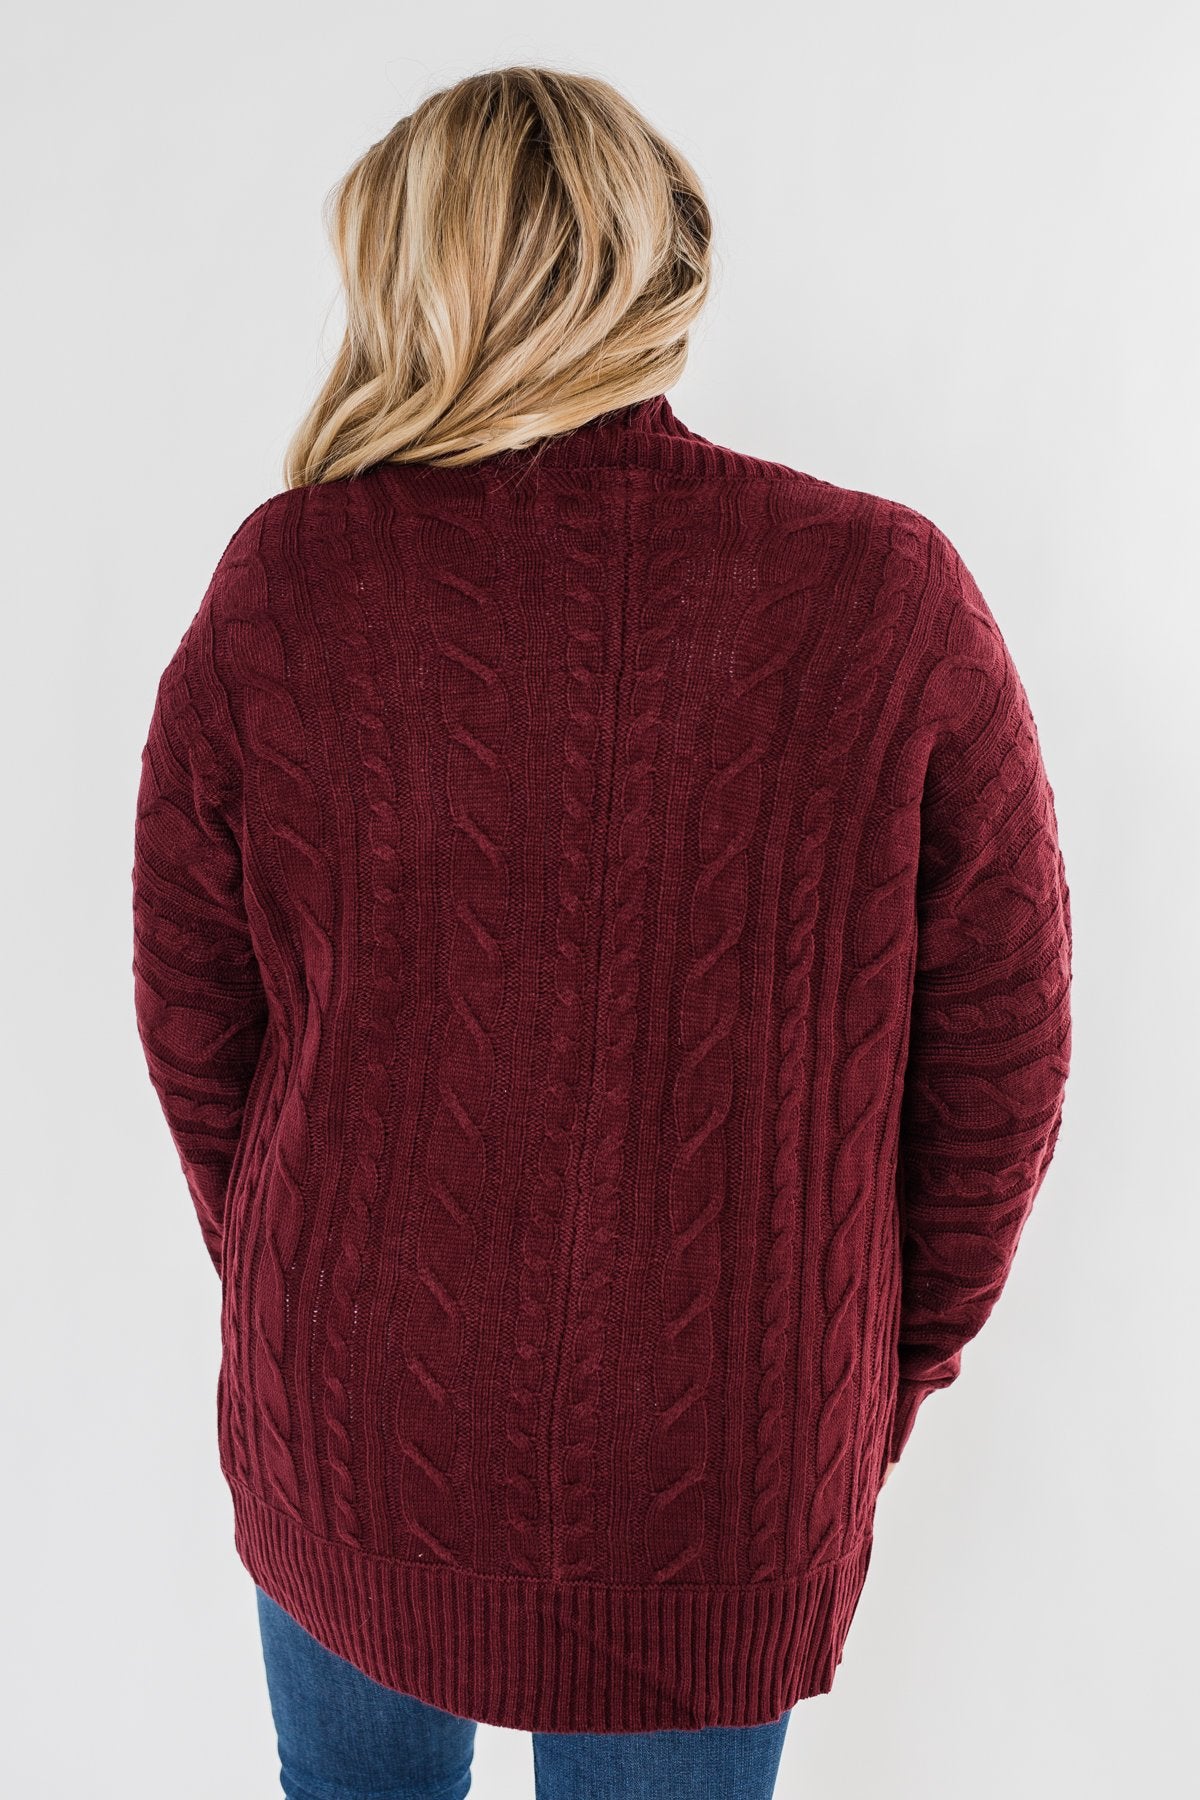 Noticing You Cable Knit Cardigan- Burgundy